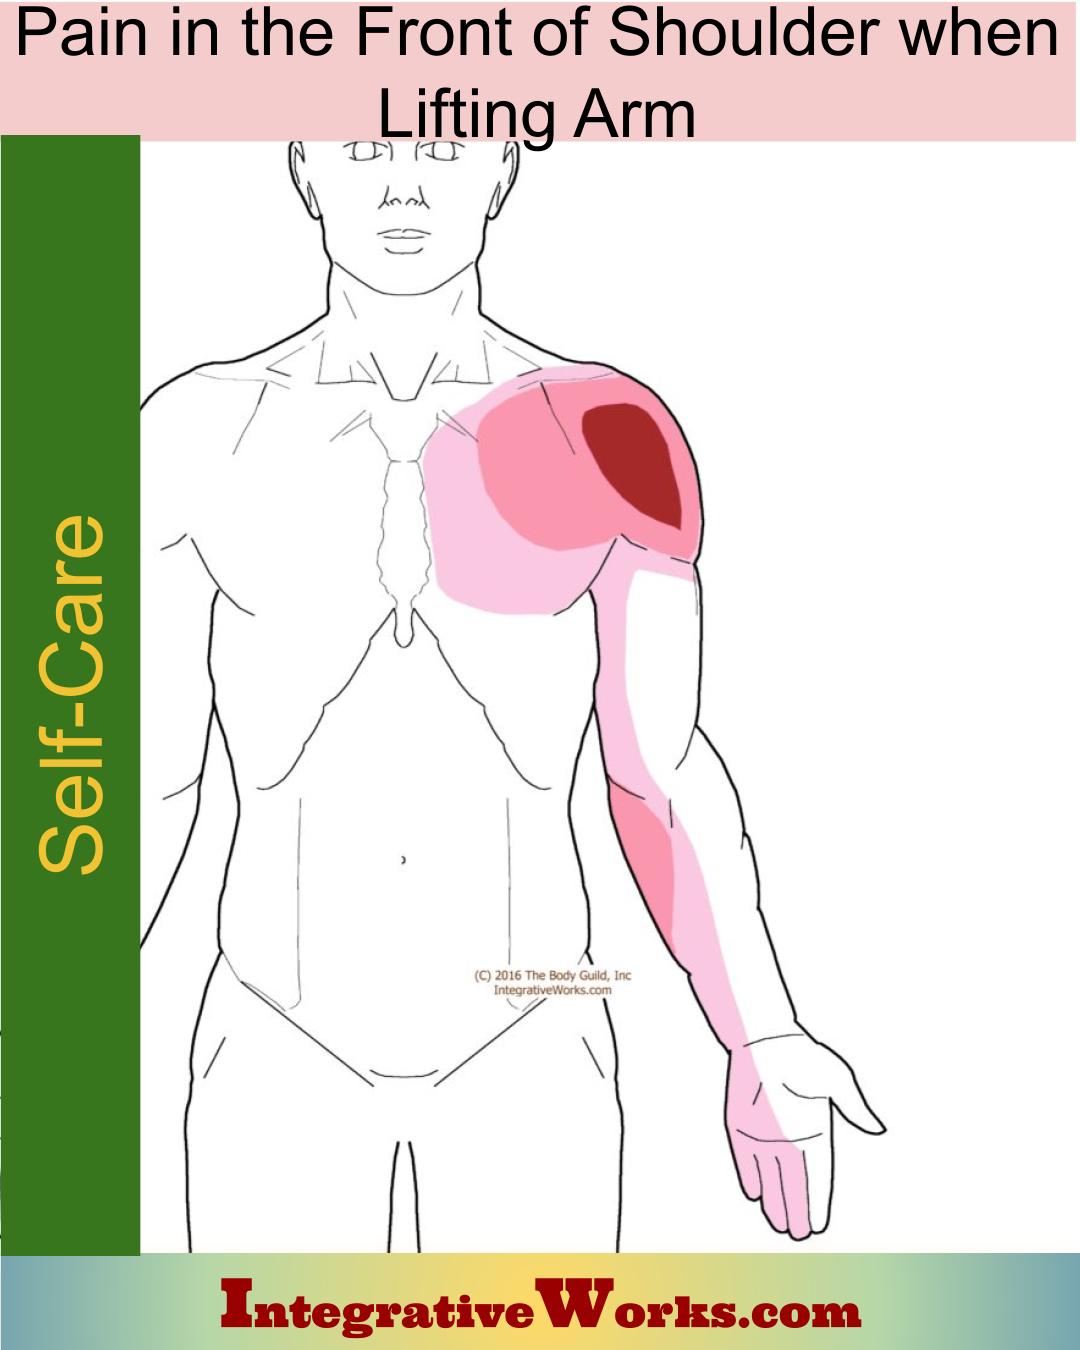 Self Care – Pain in the Front of Shoulder When Lifting Arm